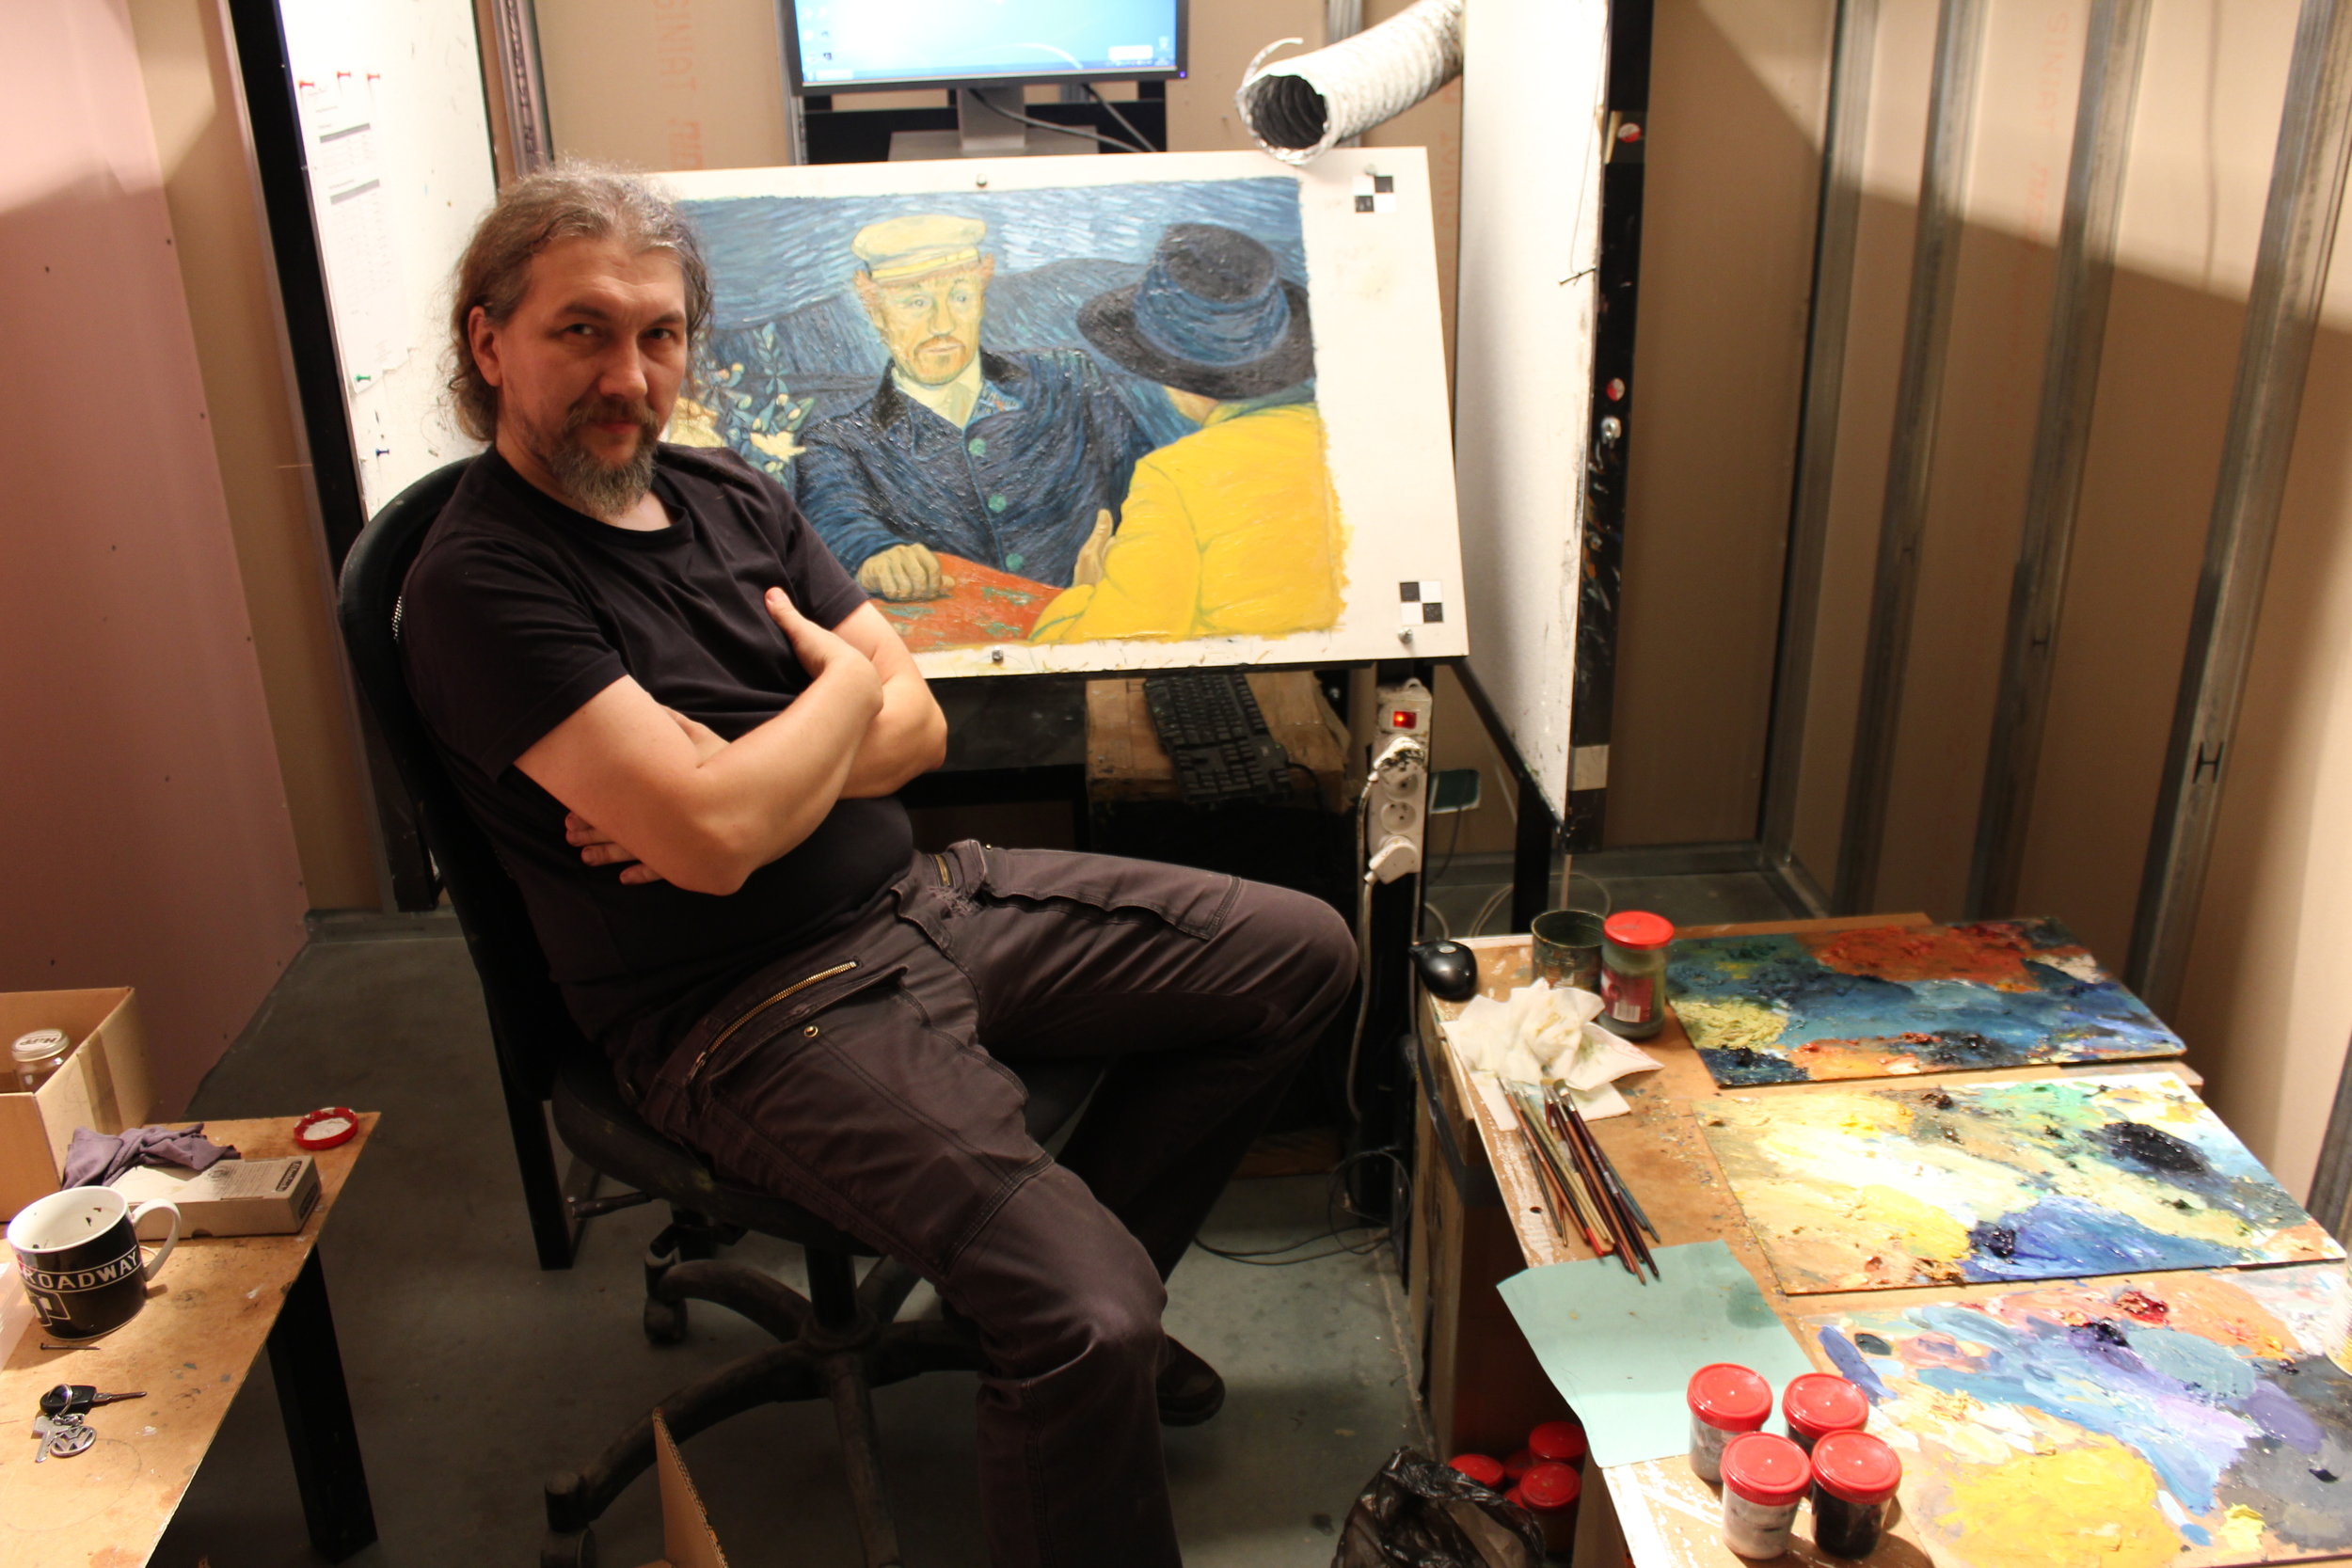  Behind the scenes images of the painting animators behind the award-winning film, " Loving Vincent " - courtesy of BreakThru Films 